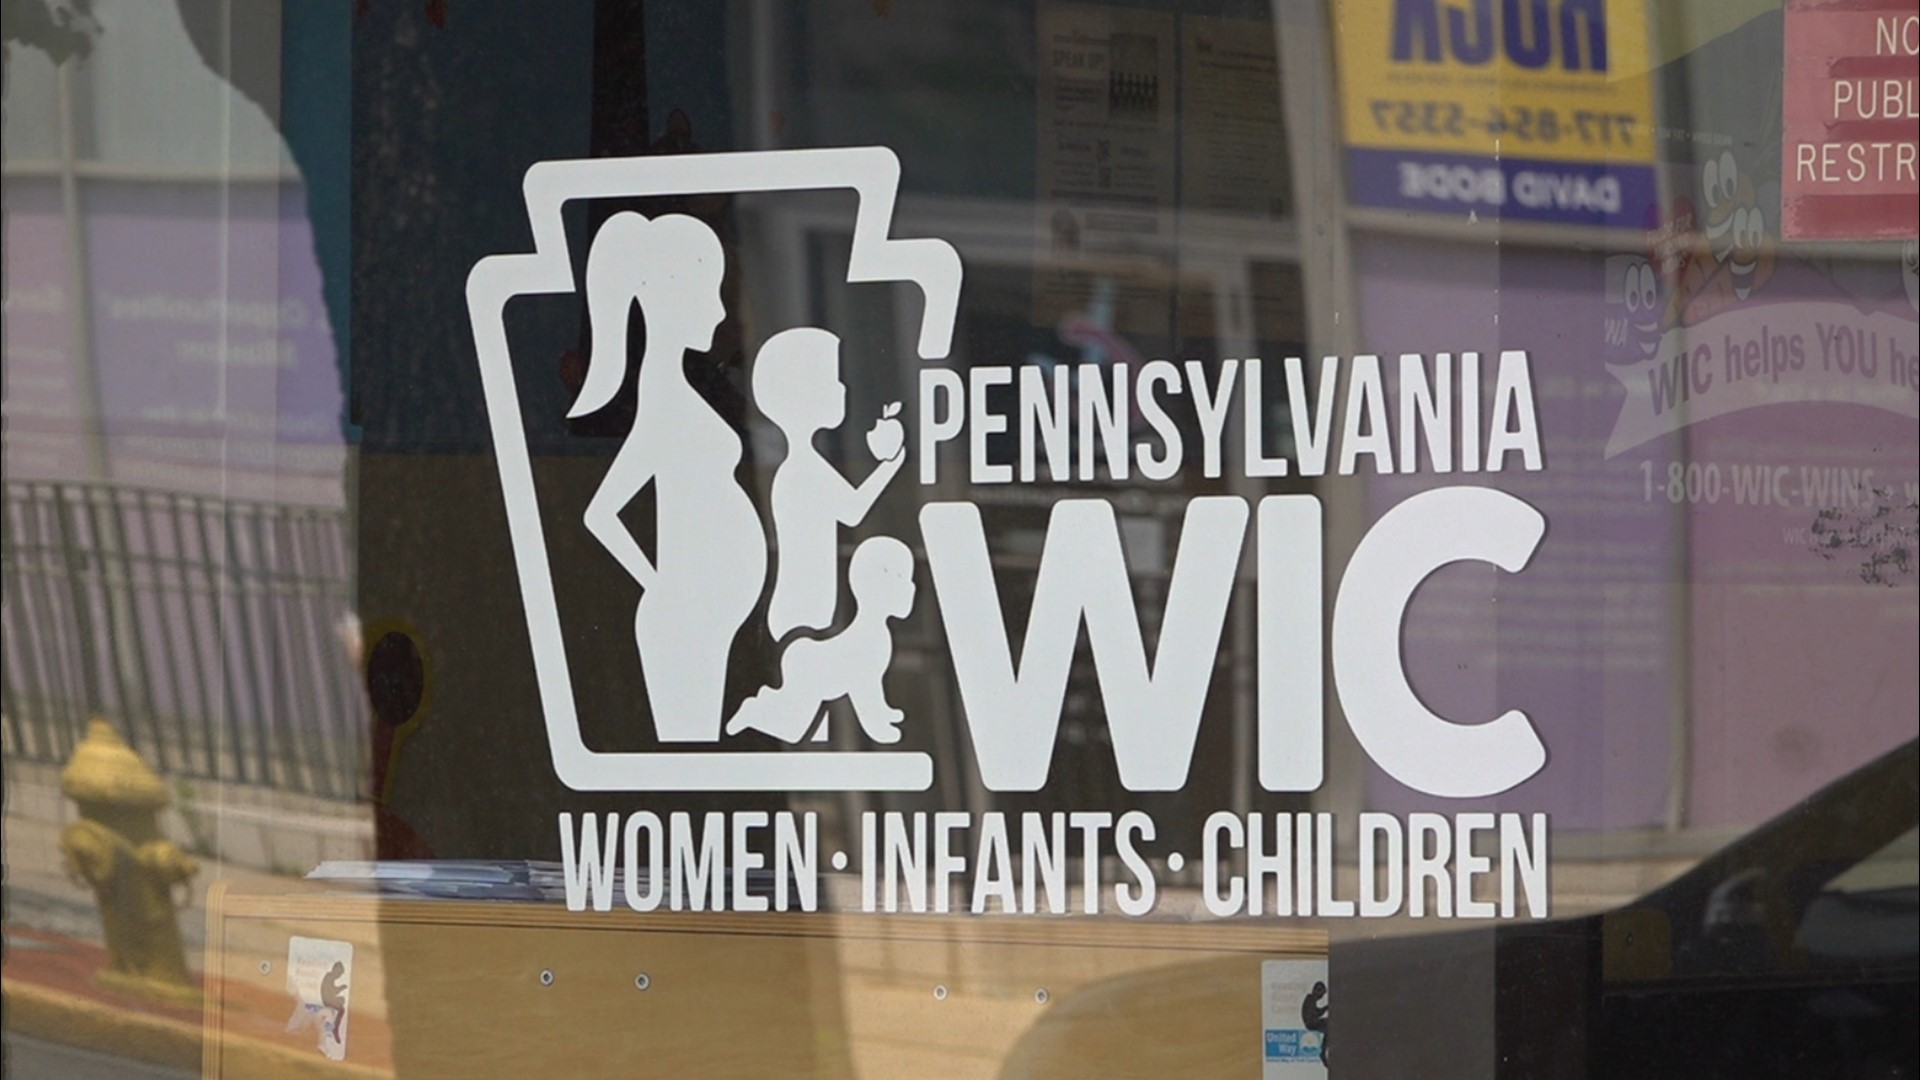 Just 42.6% of eligible Pennsylvanians signed up for WIC benefits as of 2020, according to USDA statistics.